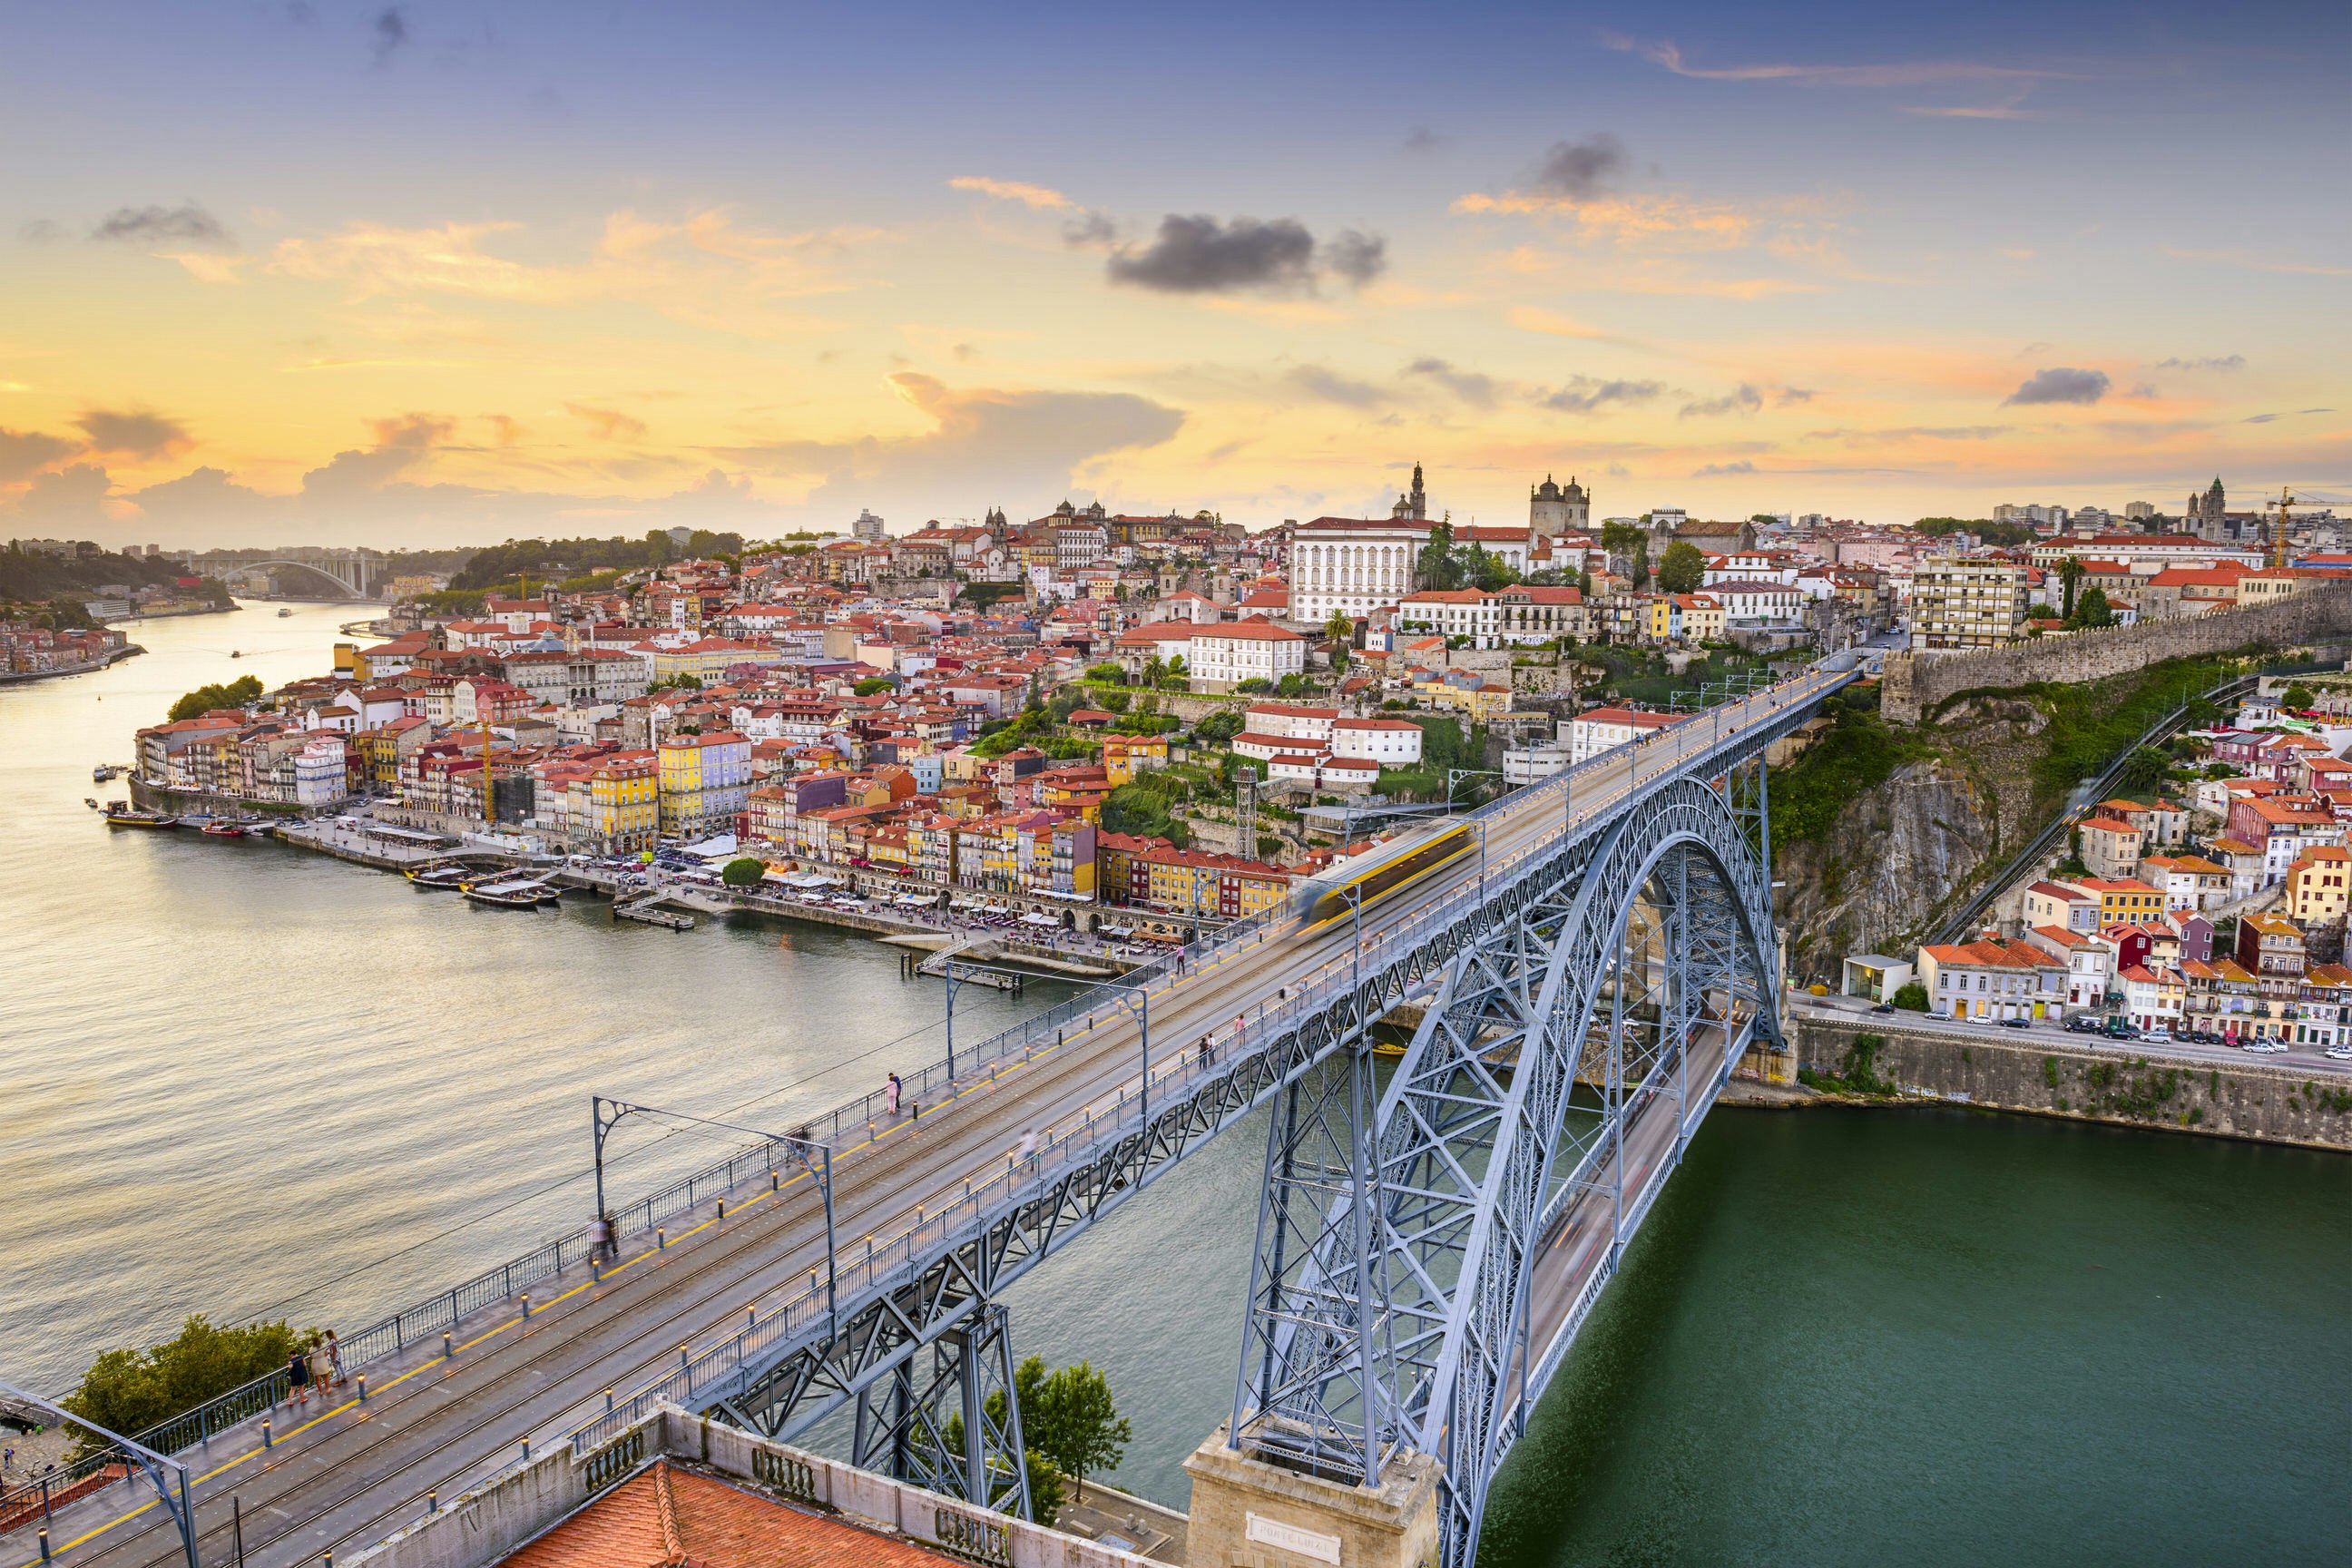 The Dom Luis Bridge stretches out over the rippling waters of the Douro river at sunset.